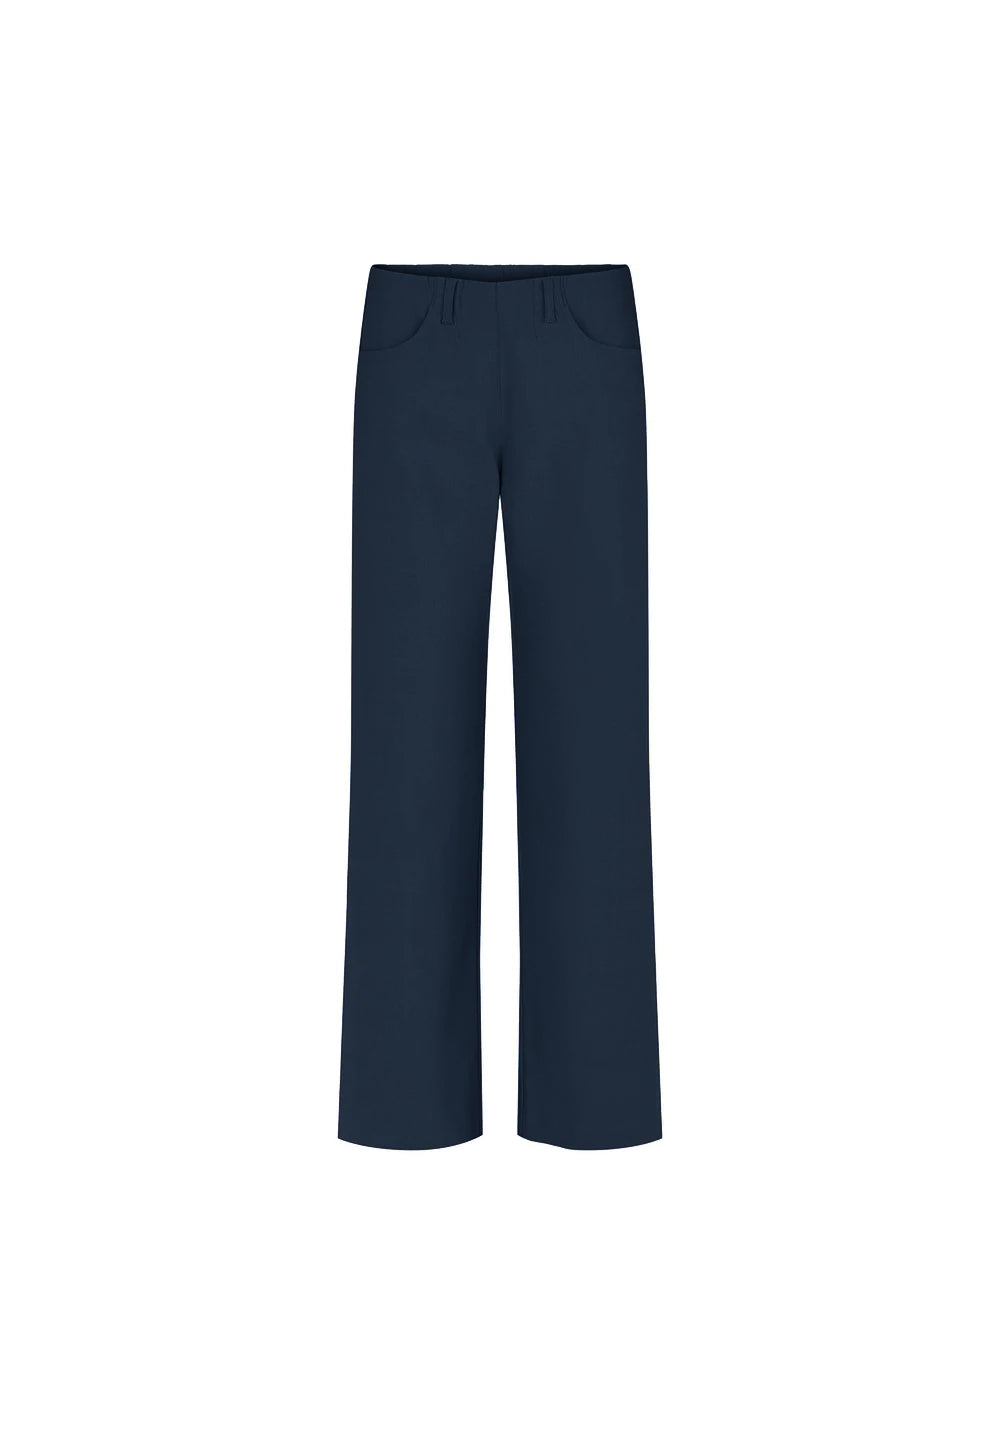 LAURIE Donna Loose - Medium Length Trousers LOOSE 49000 Navy